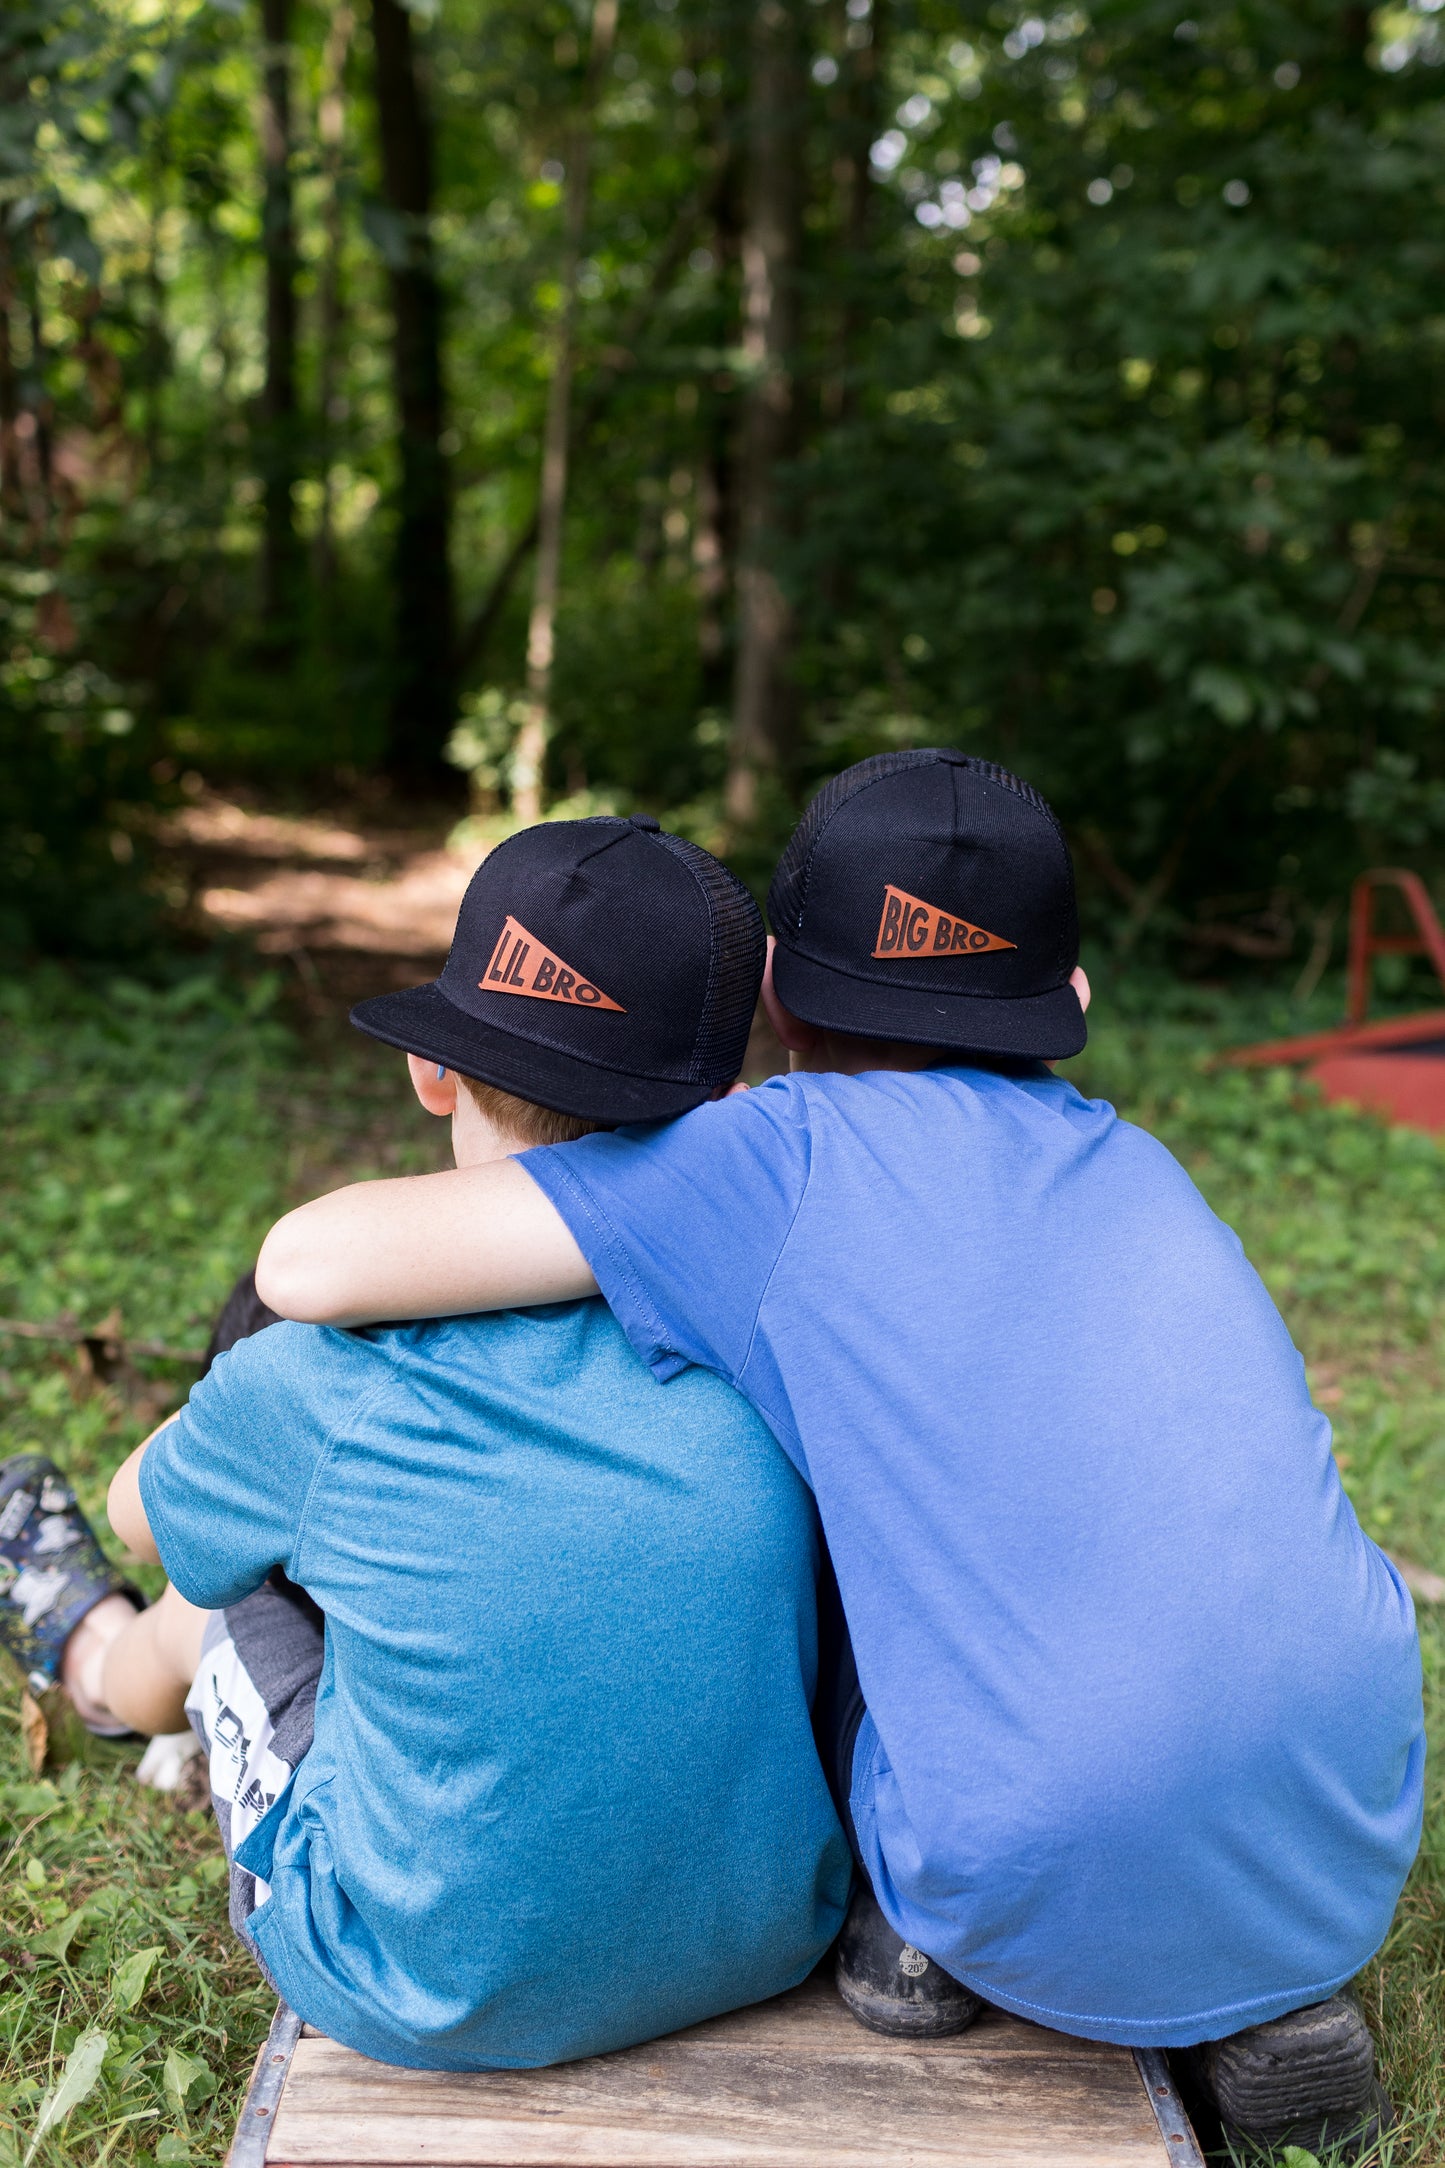 Big Bro and Lil Bro Pennant Leather Patch Hat - Black - Kids Size